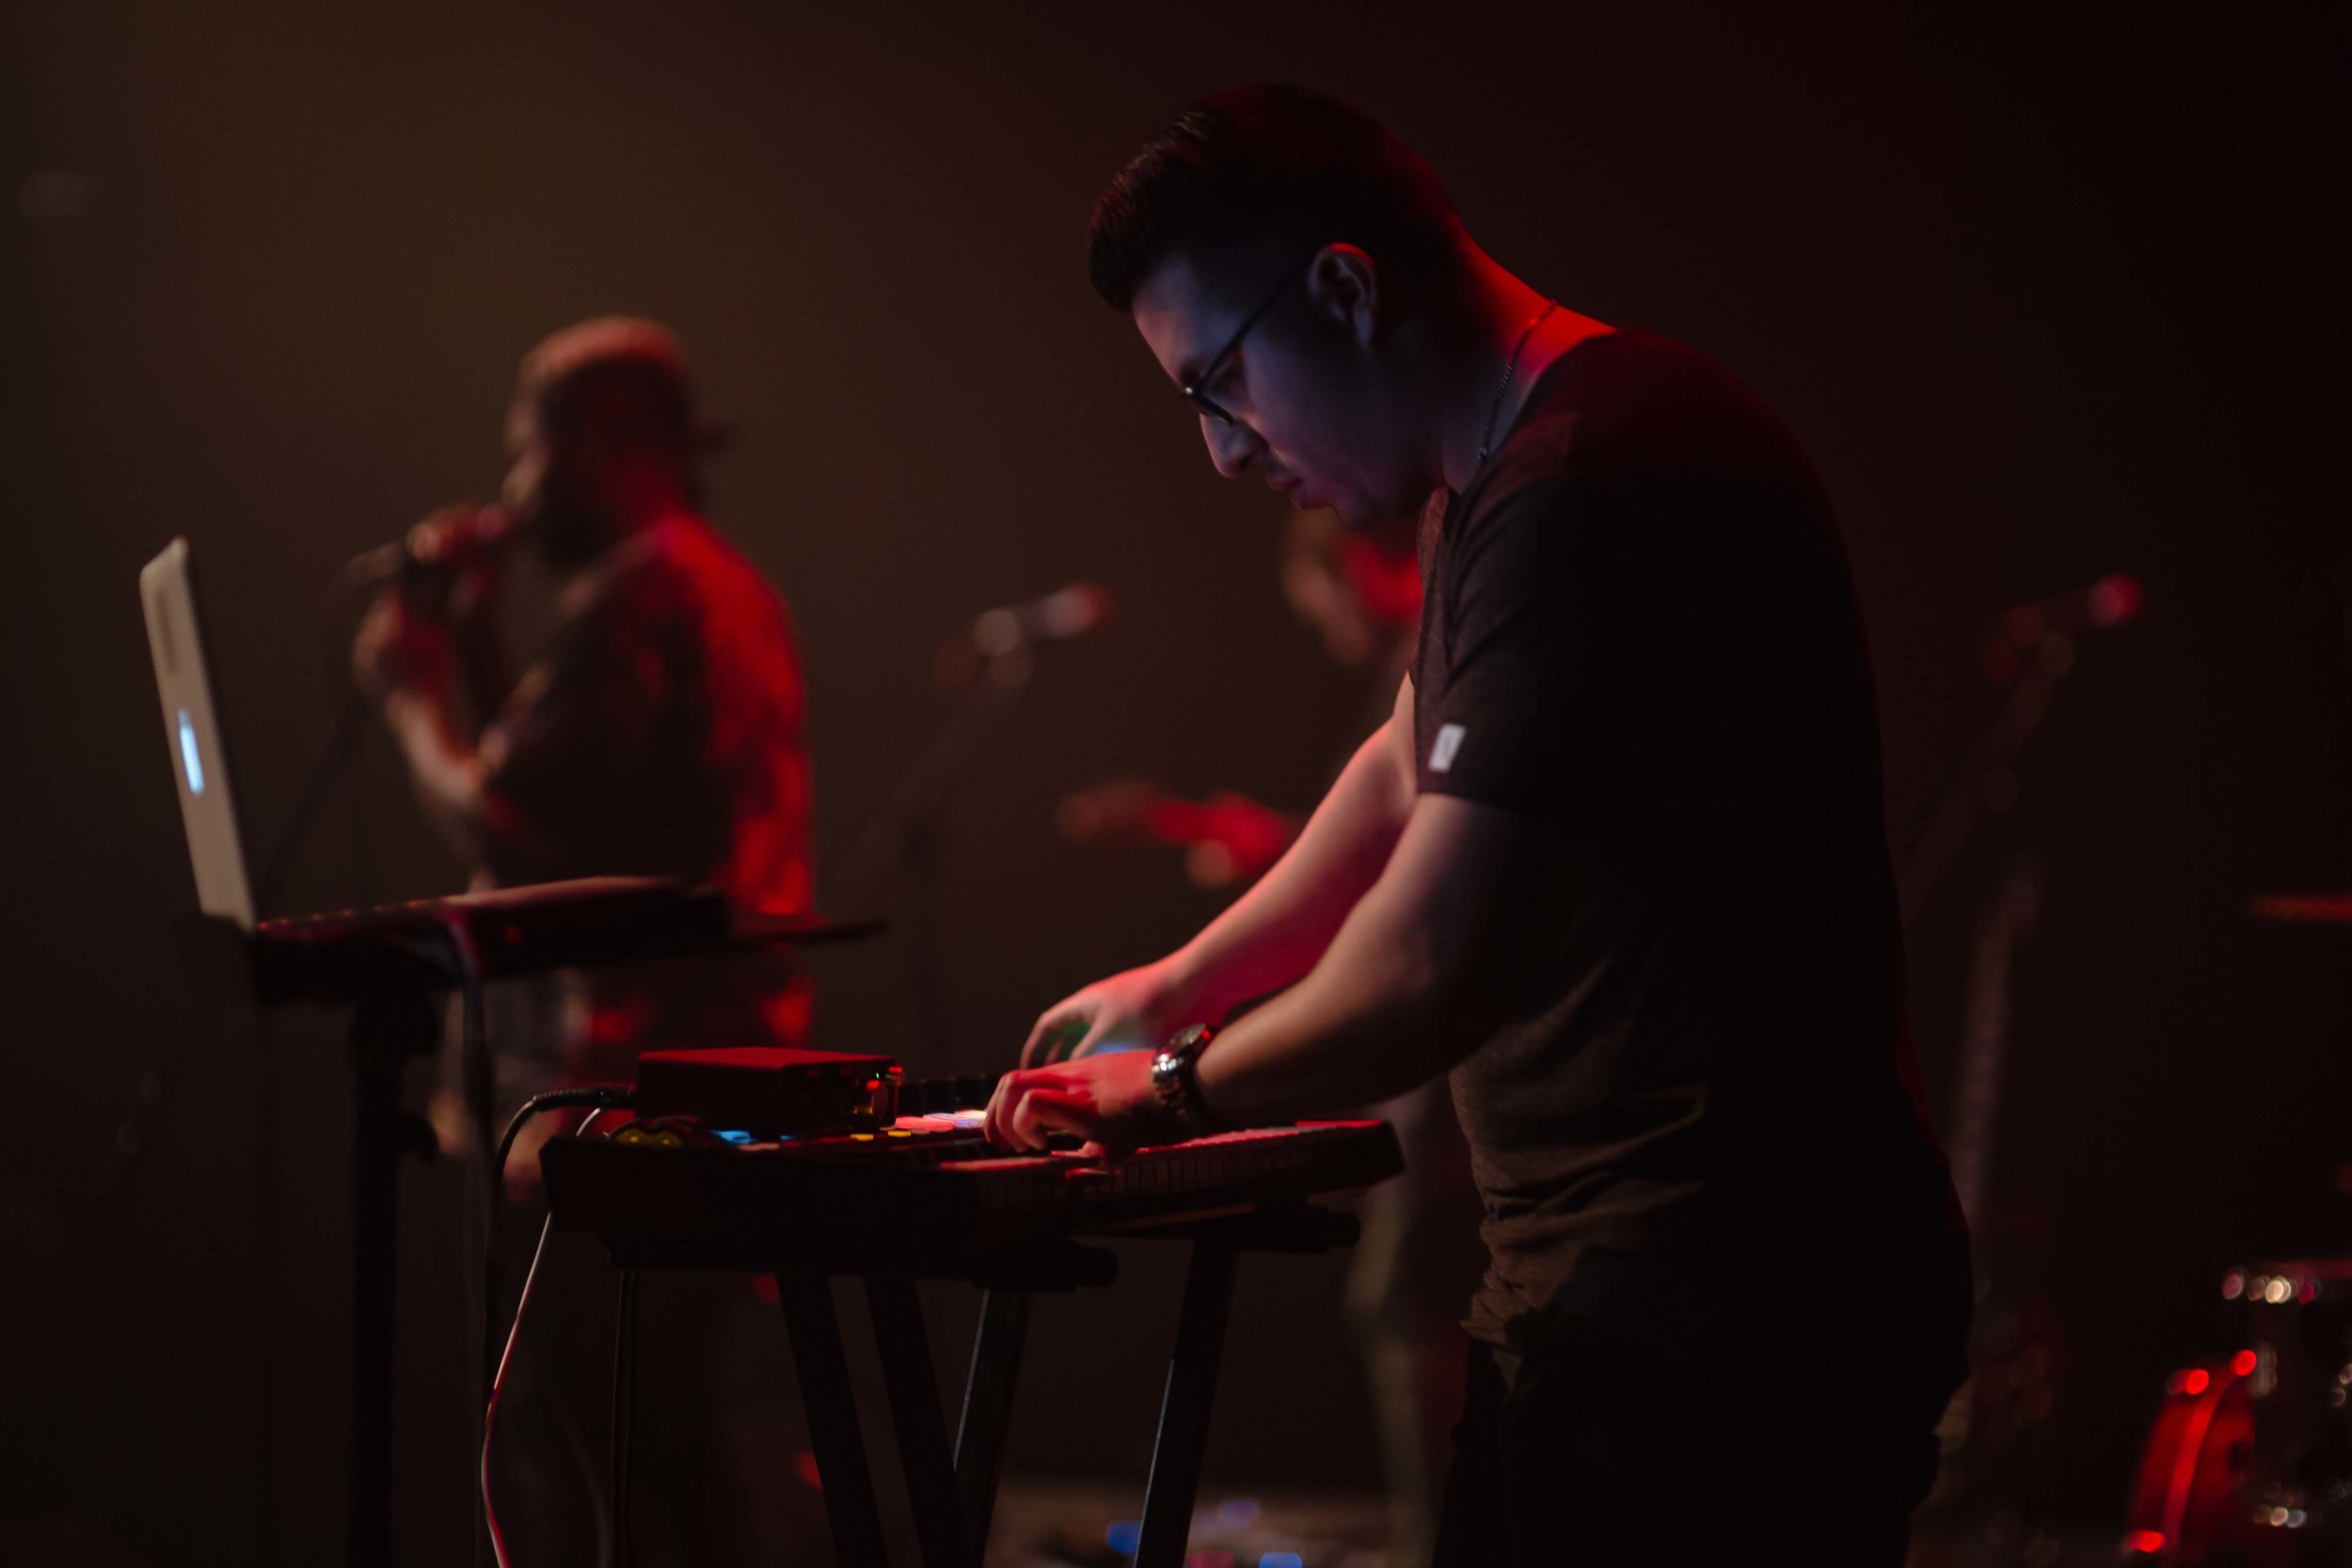 Side view of Kevin Castro (man with short dark hair and glasses) playing keyboard standing up against blurred backdrop of other musicians on a dark stage.